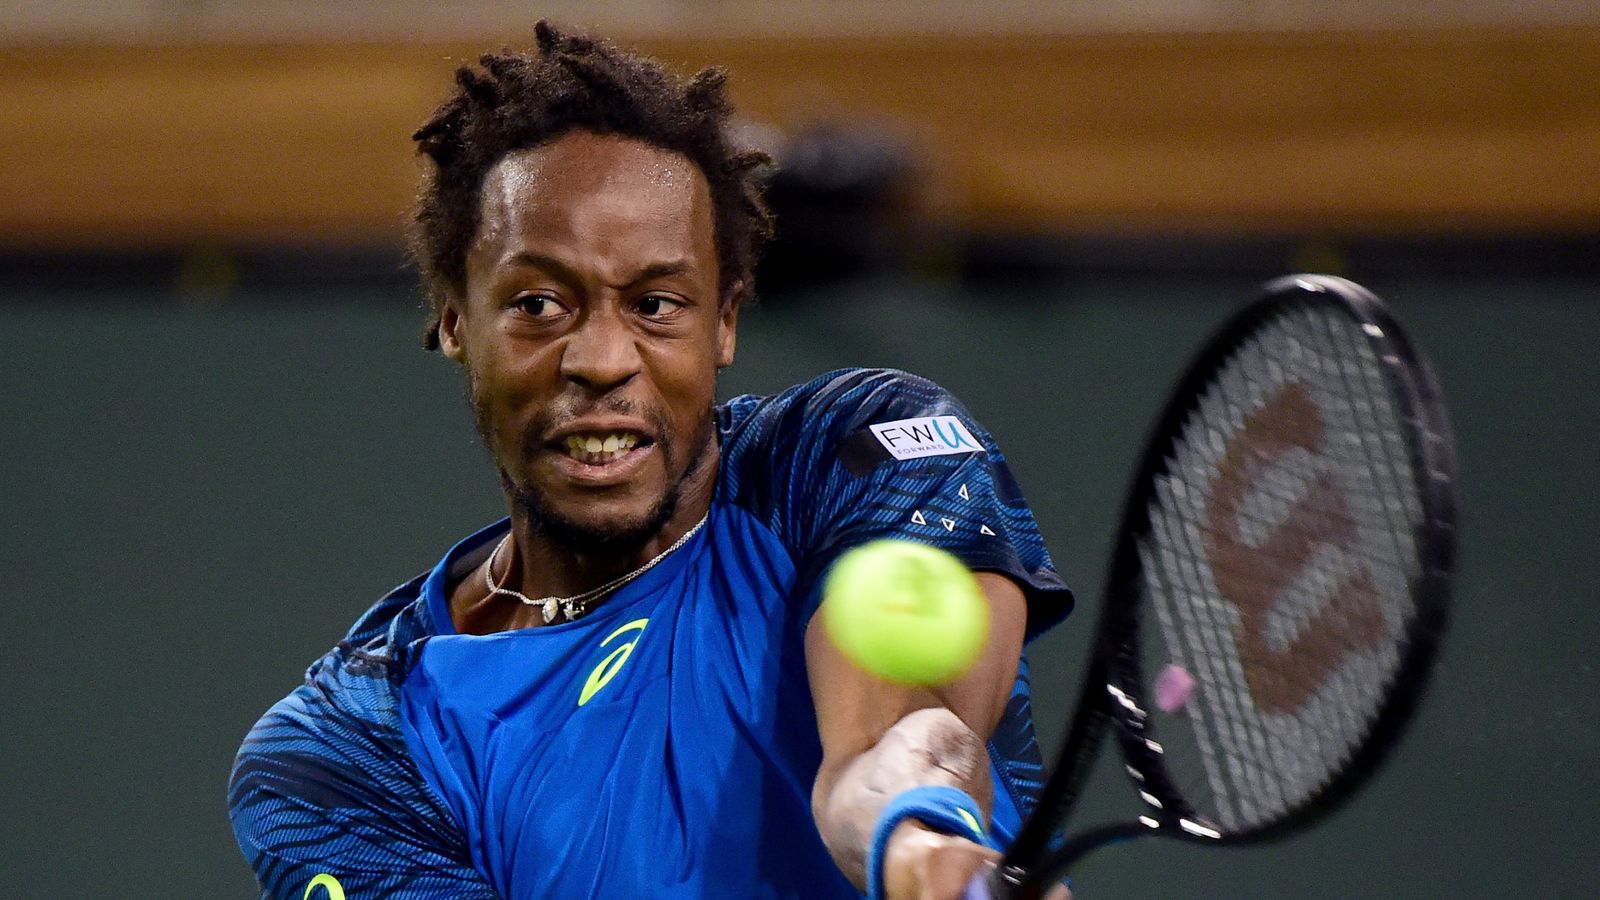 Gael Monfils and Rafael Nadal have both been entertaining the Indian Wells crowds | Tennis News ...